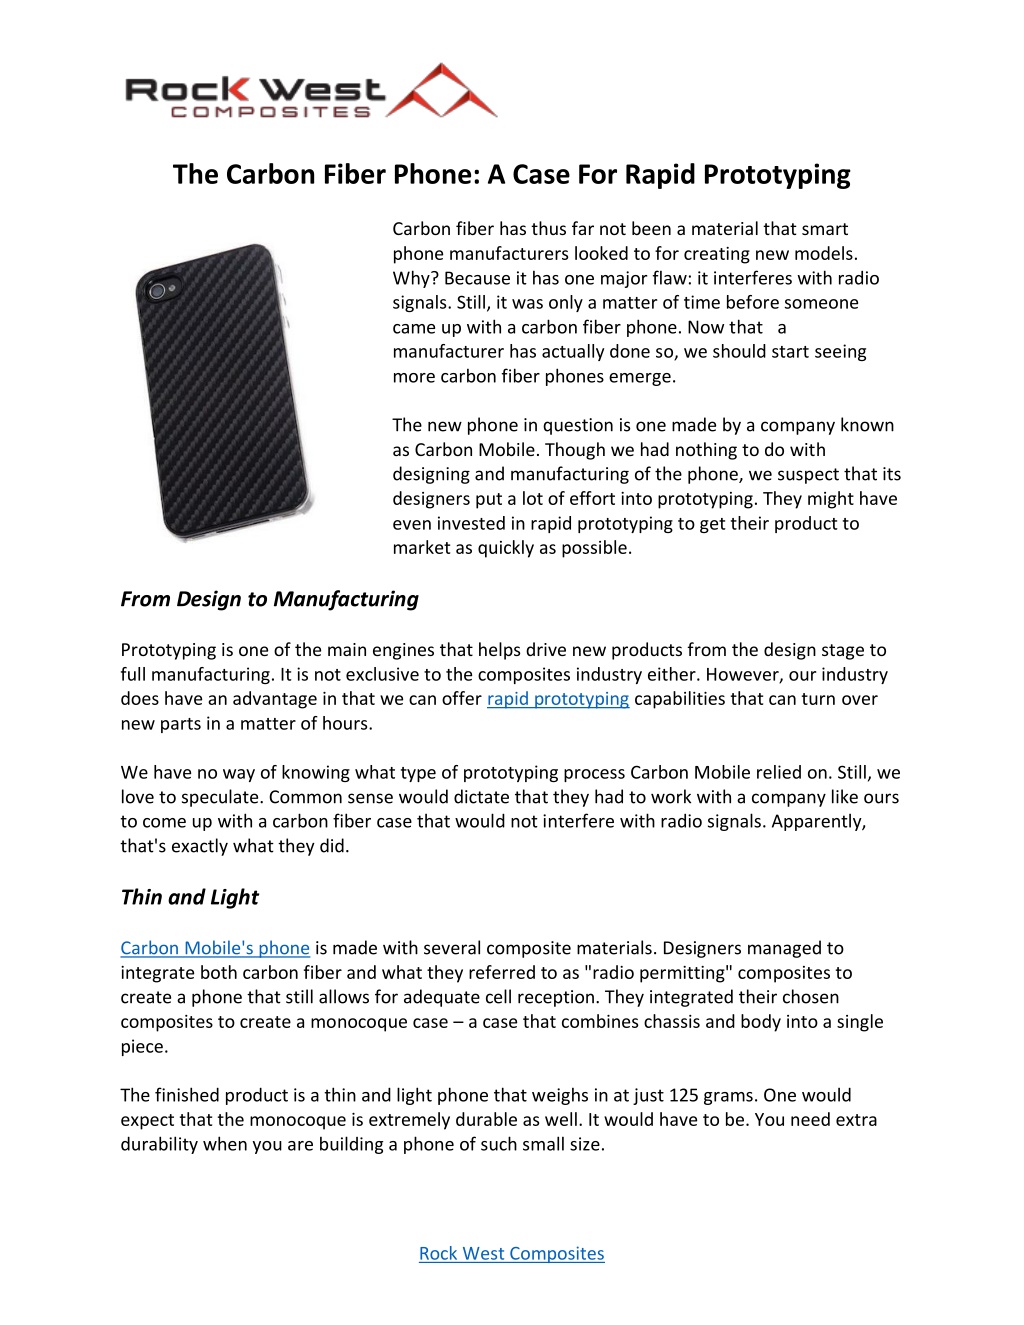 PPT - The Carbon Fiber Phone: A Case For Rapid Prototyping PowerPoint ...